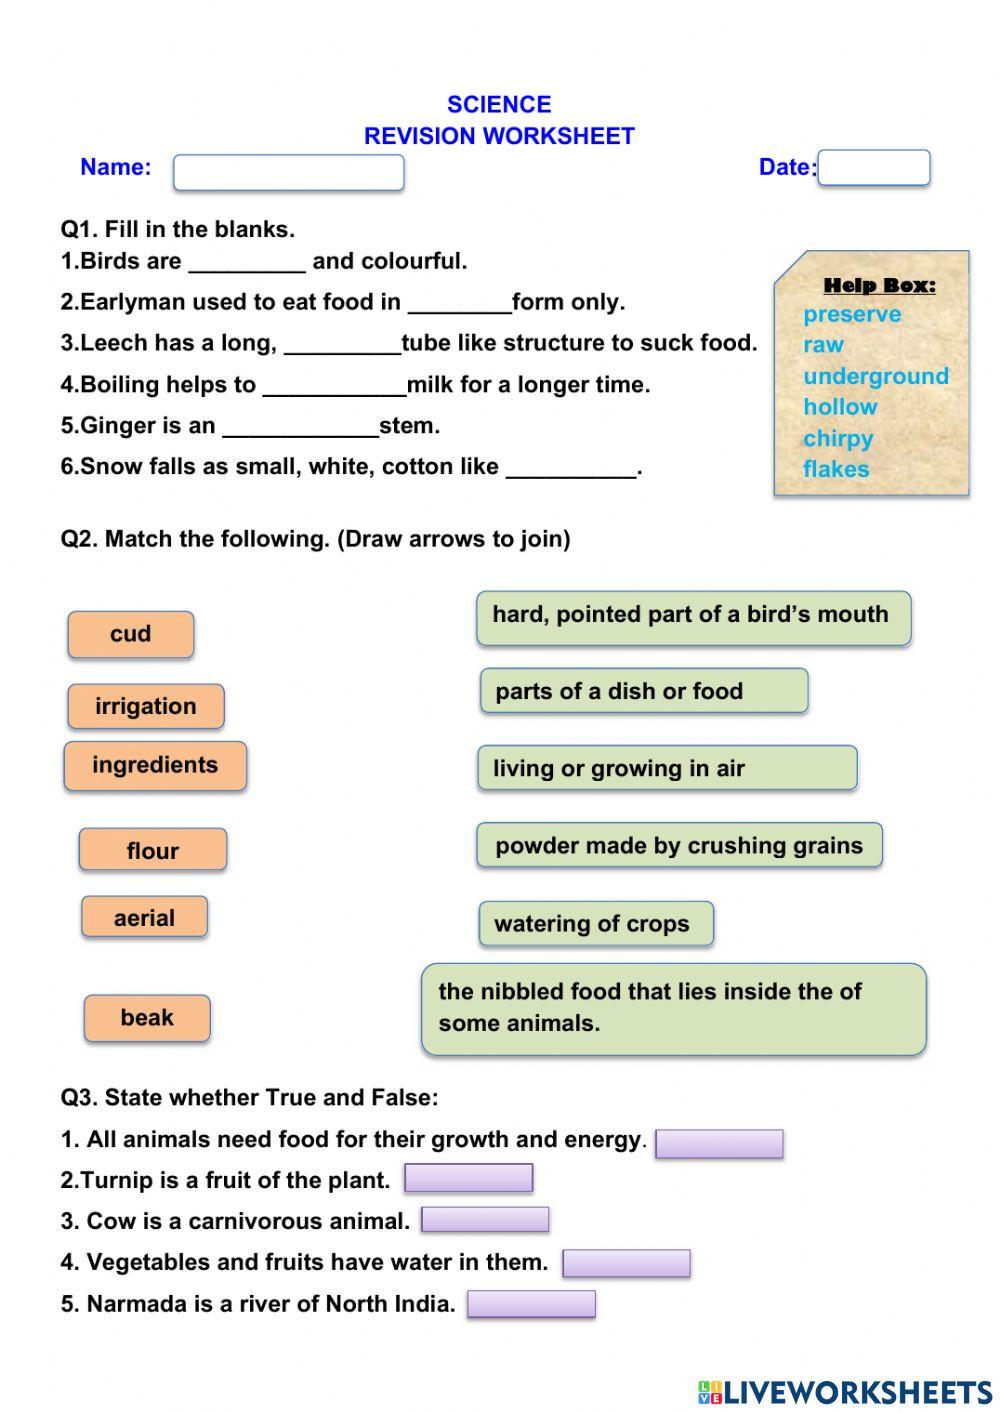 Science combined revision worksheet